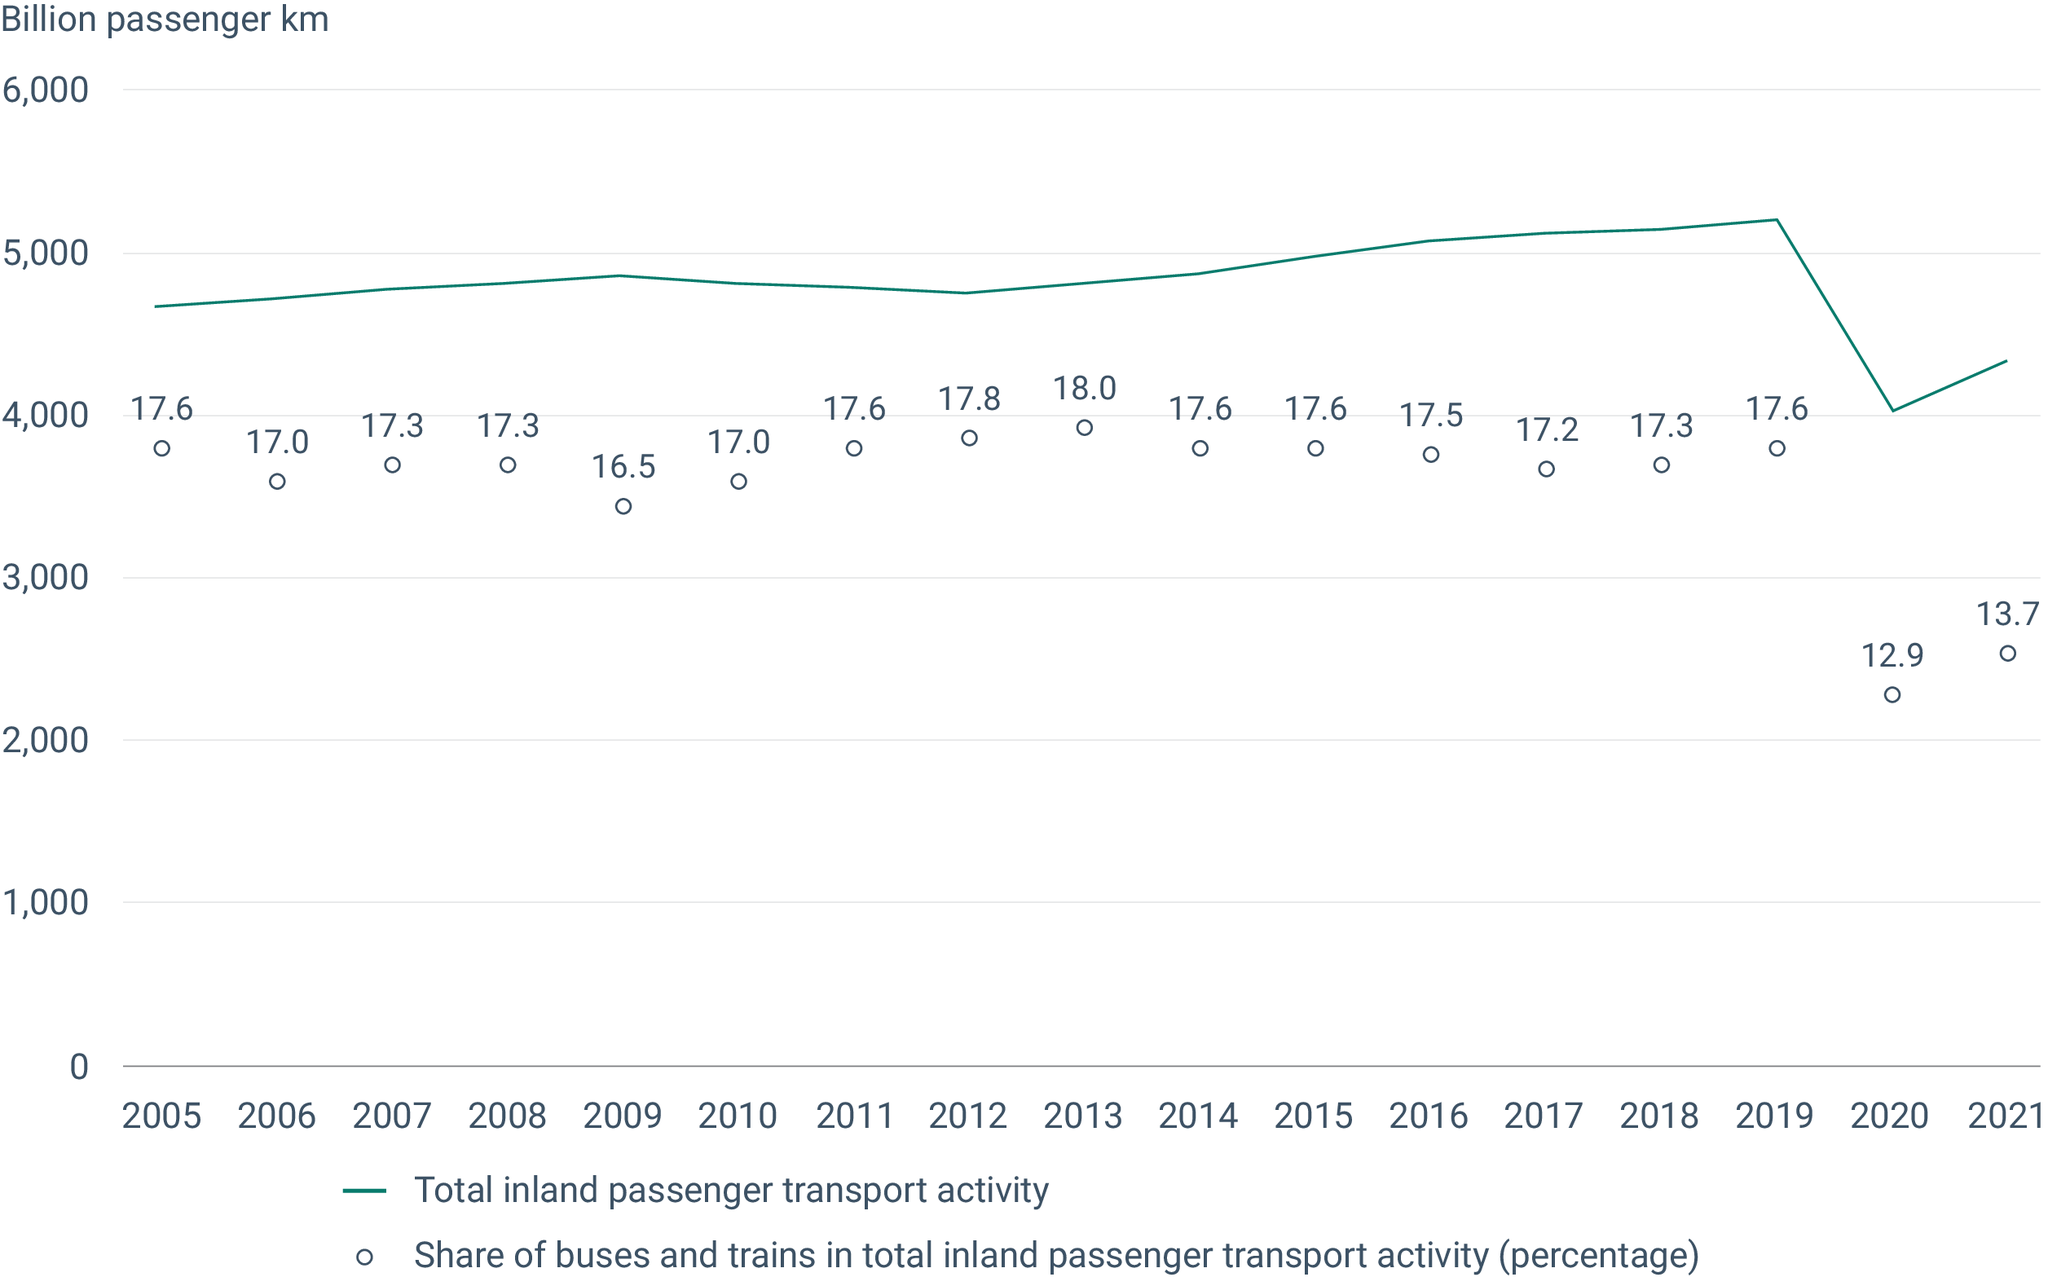 Share of bus and trains in total inland passenger transport activity in the EU-27